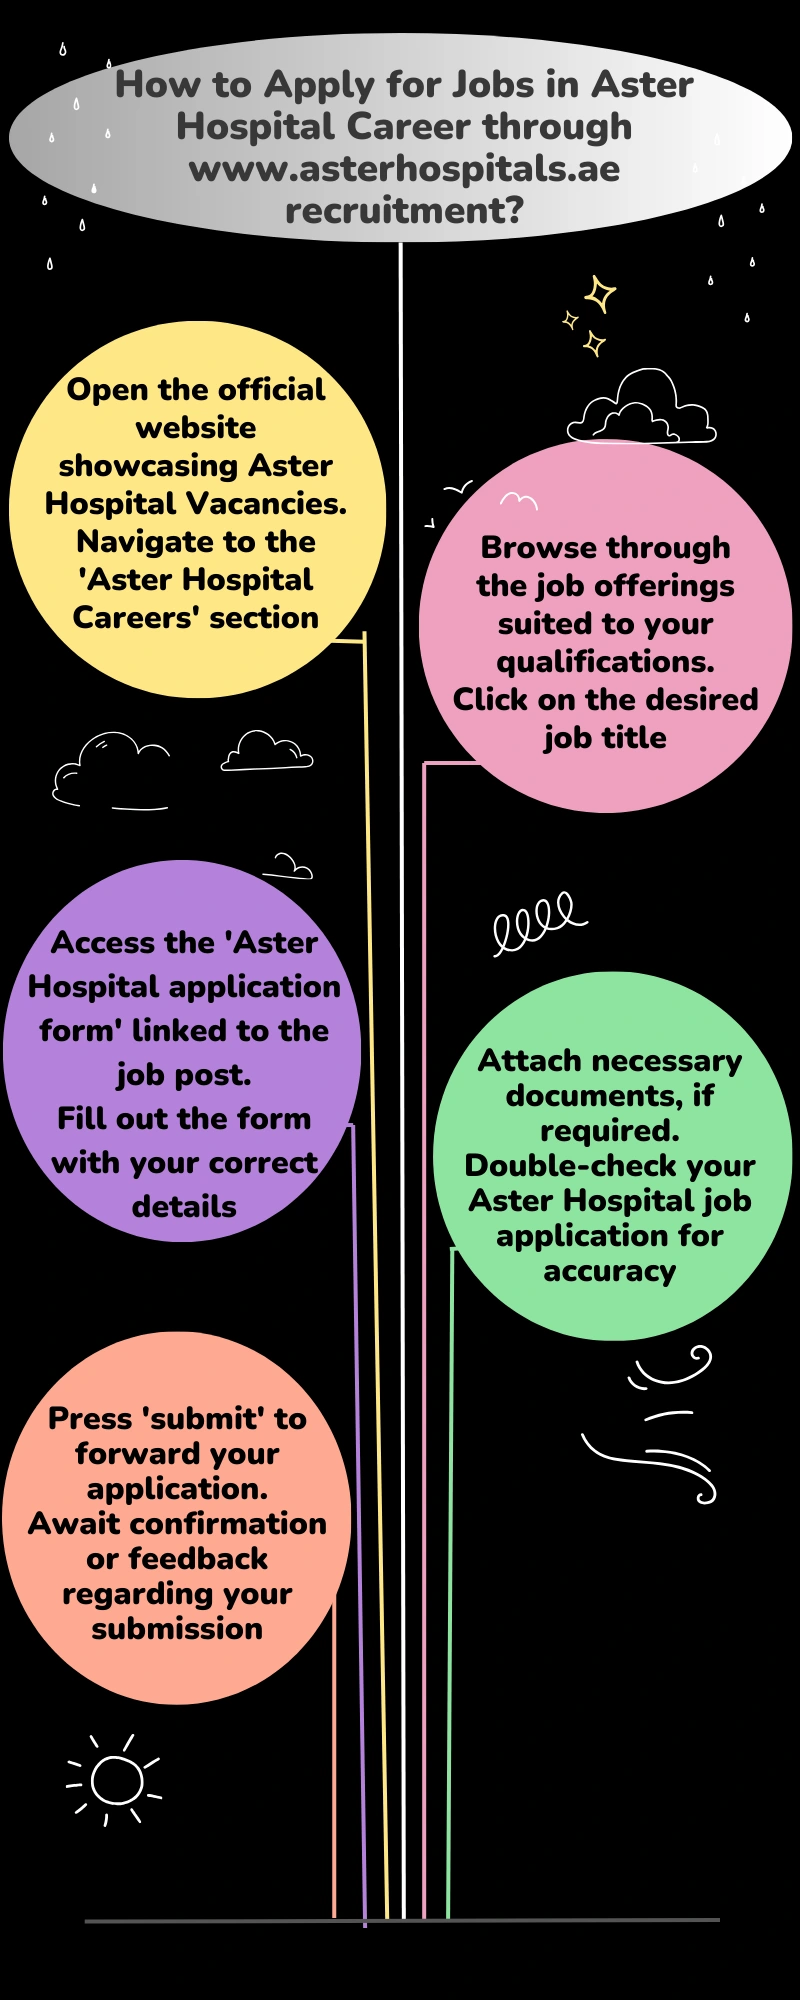 How to Apply for Jobs in Aster Hospital Career through www.asterhospitals.ae recruitment_